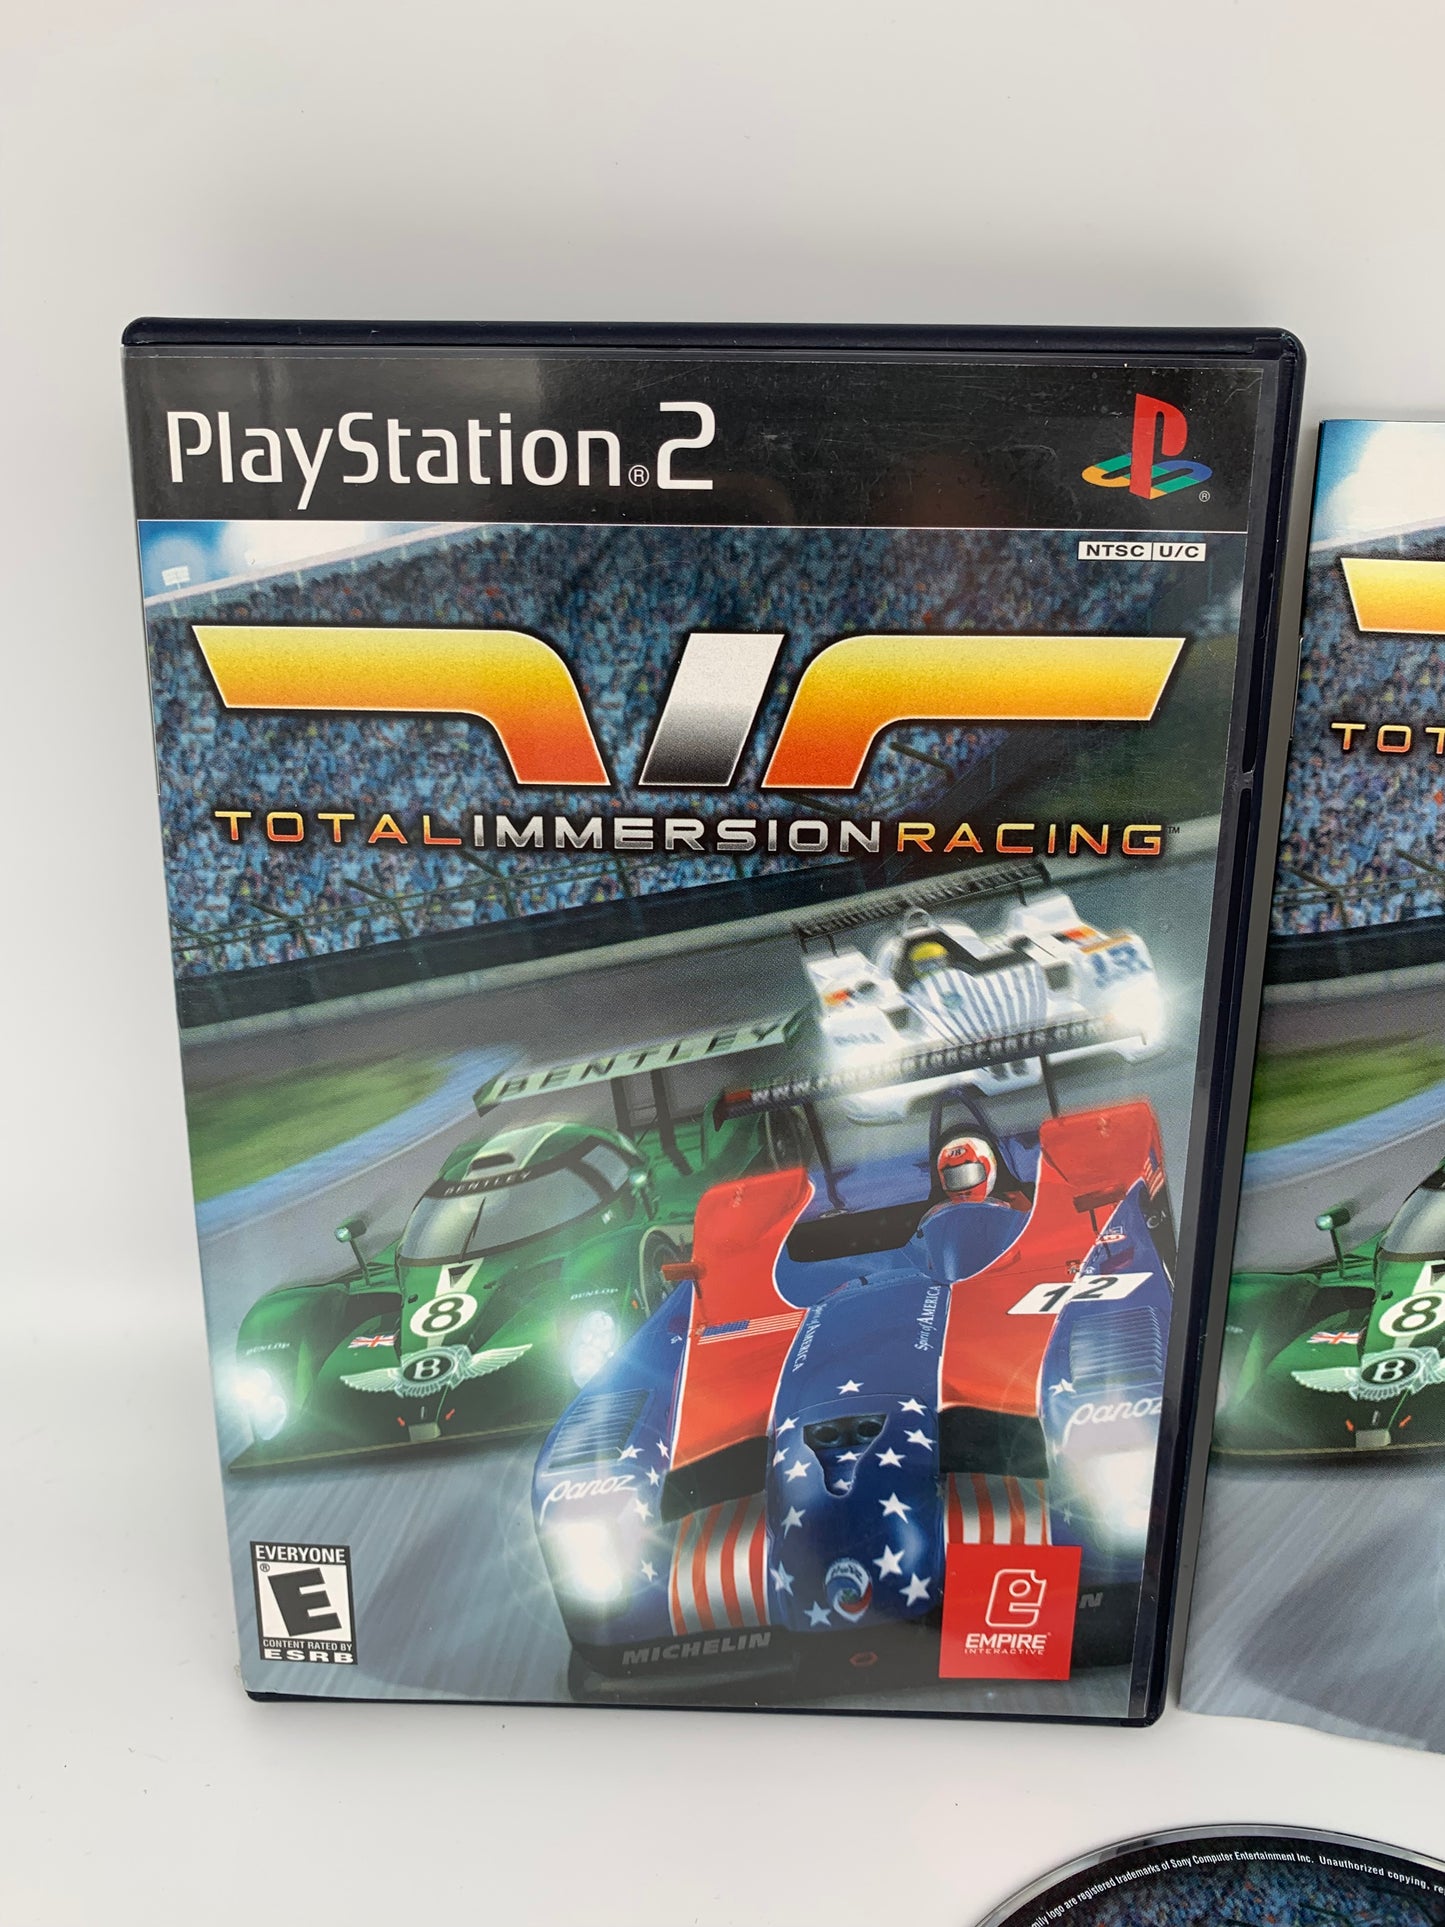 SONY PLAYSTATiON 2 [PS2] | TOTAL iMMERSiON RACiNG